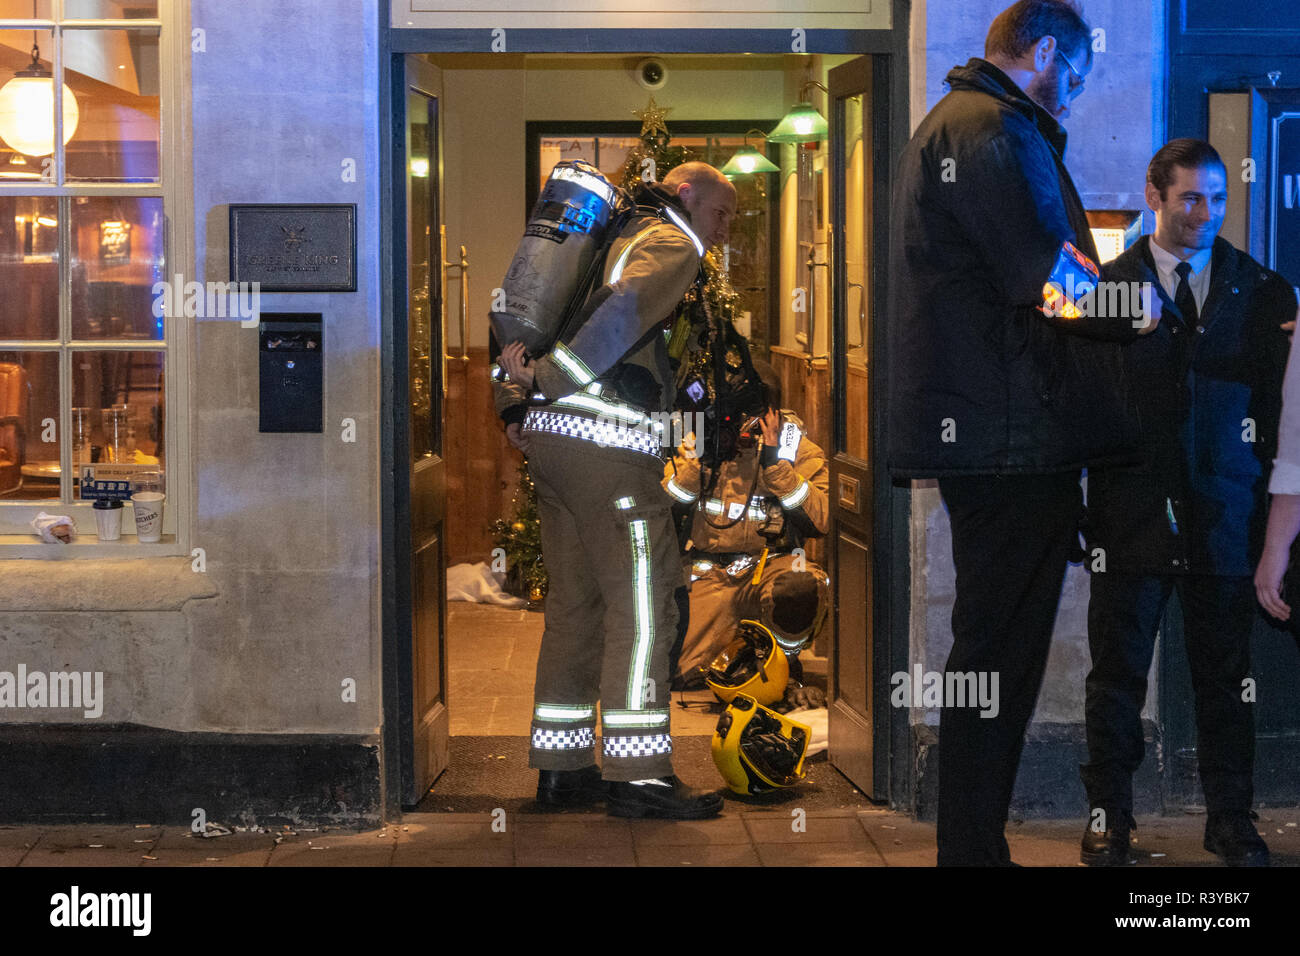 Bath Somerset UK, 24th November 2018  Fire crew putting on breathing apparatus  in doorway of Wesgate public house in bath somerset  Credit Estelle Bowden/Alamy Live News Stock Photo